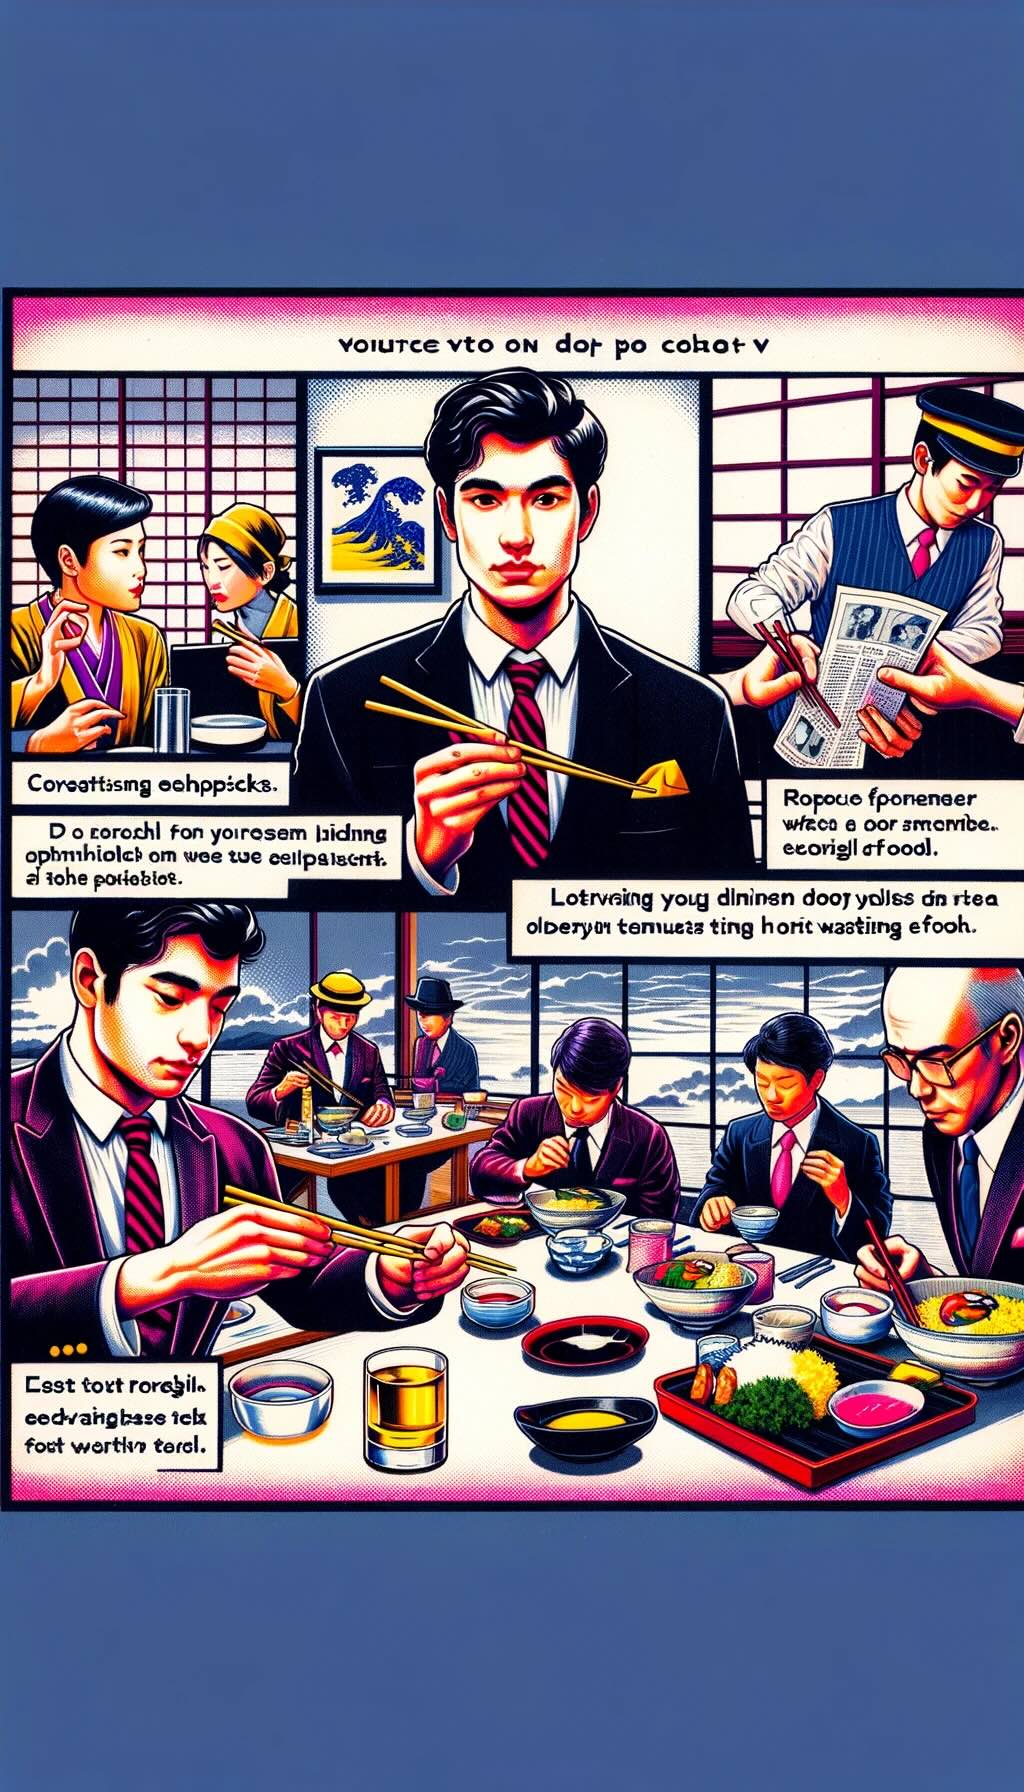 Etiquette tips and advice for foreigners in Japanese dining settings, depicting a foreigner engaging with the culture and learning the customs, 